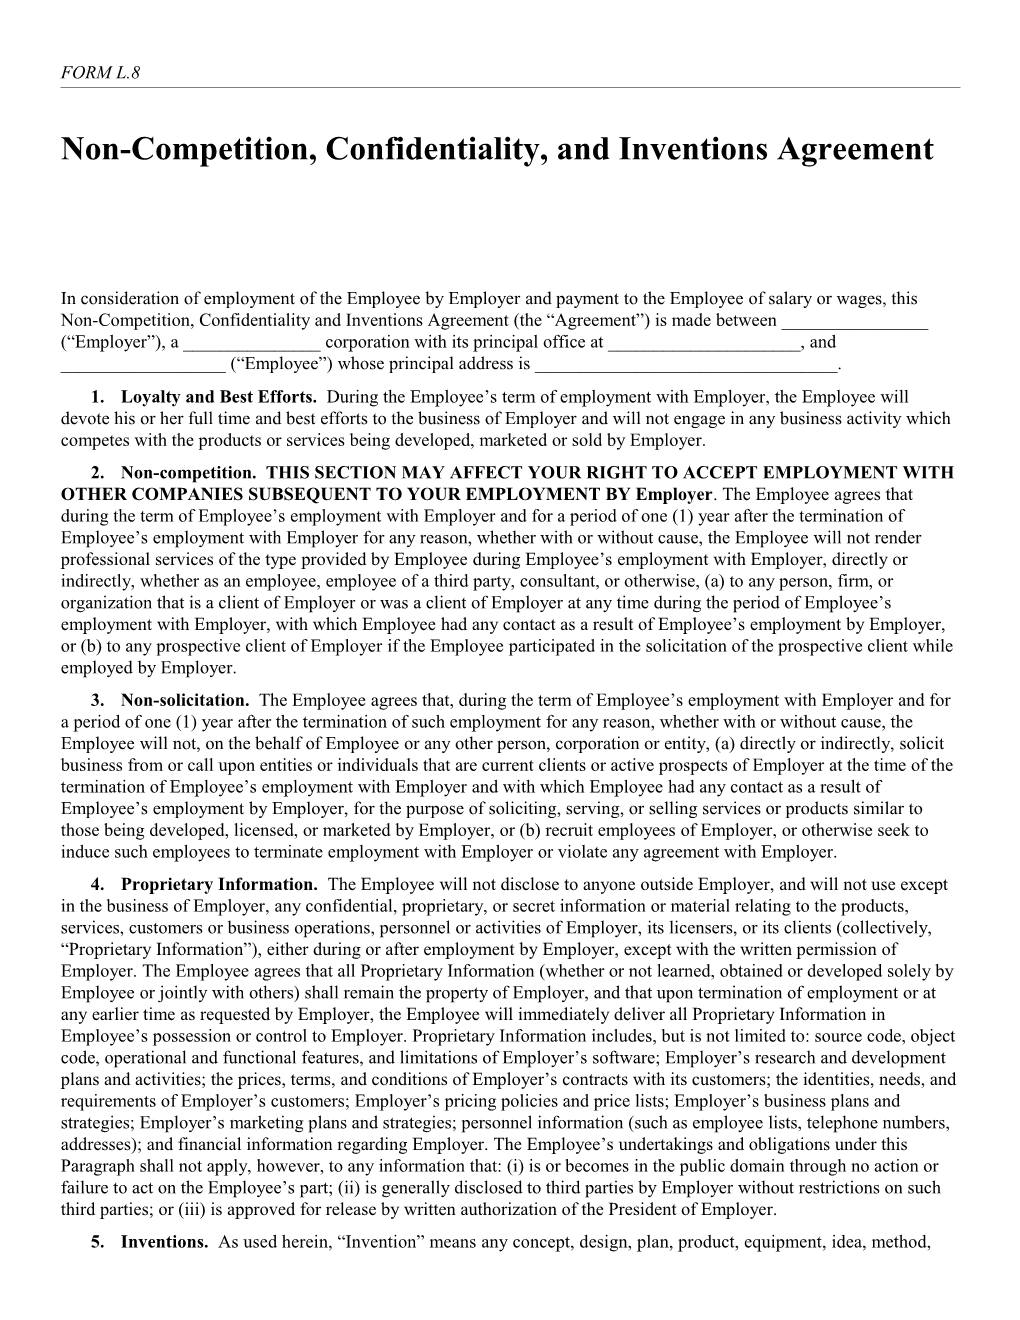 Non-Competition, Confidentiality, and Inventions Agreement